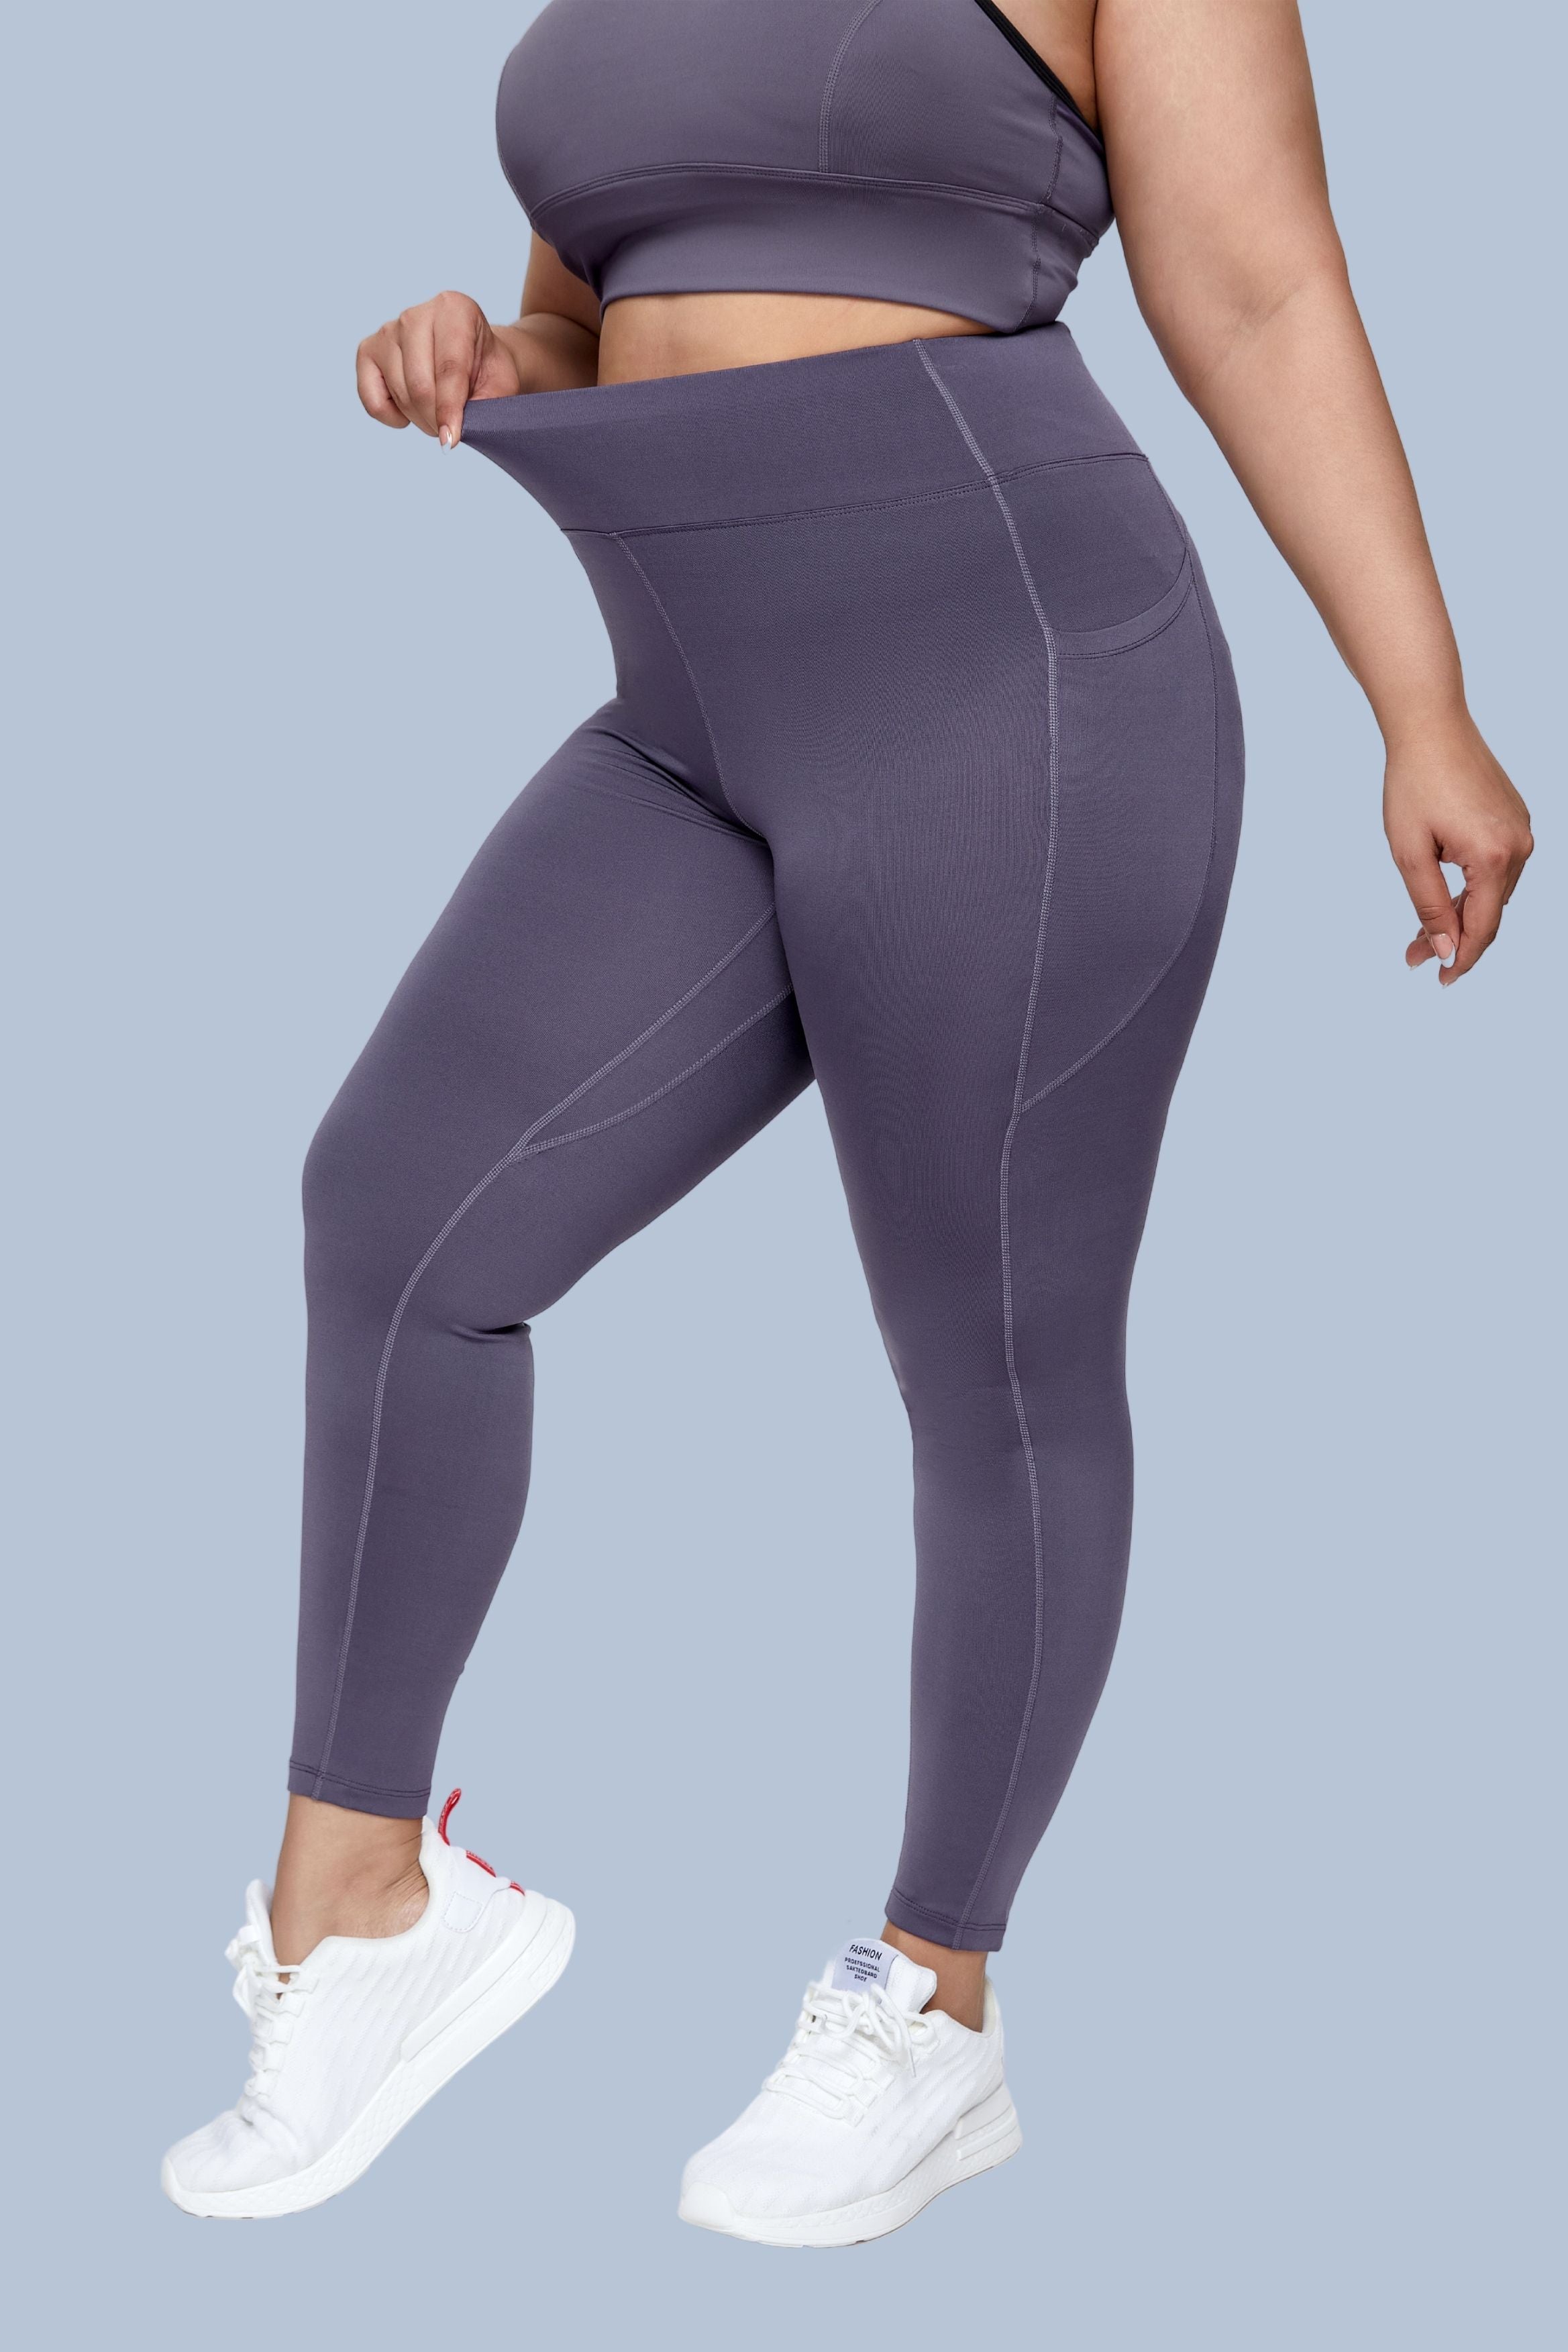 Walifrey Plus Size Leggings with Pockets for Women, High Waist